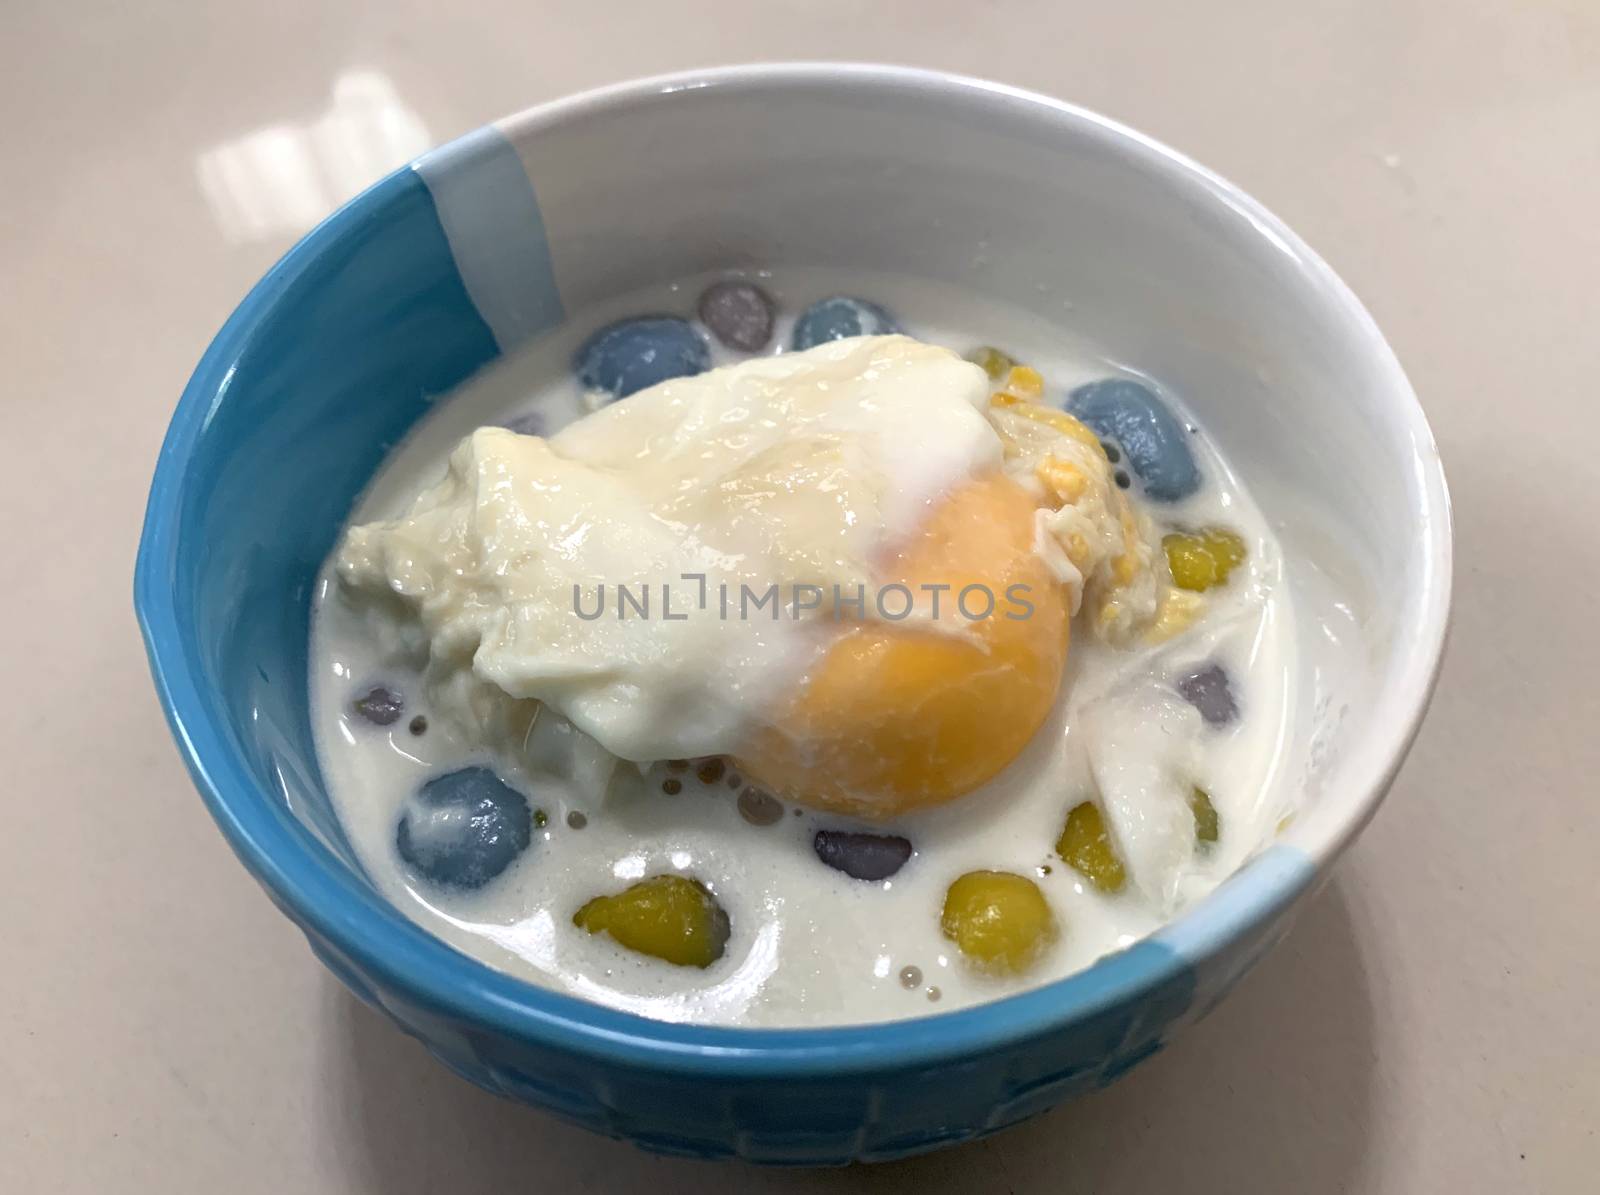 Sticky rice pearls in coconut milk with poached egg in light syrup